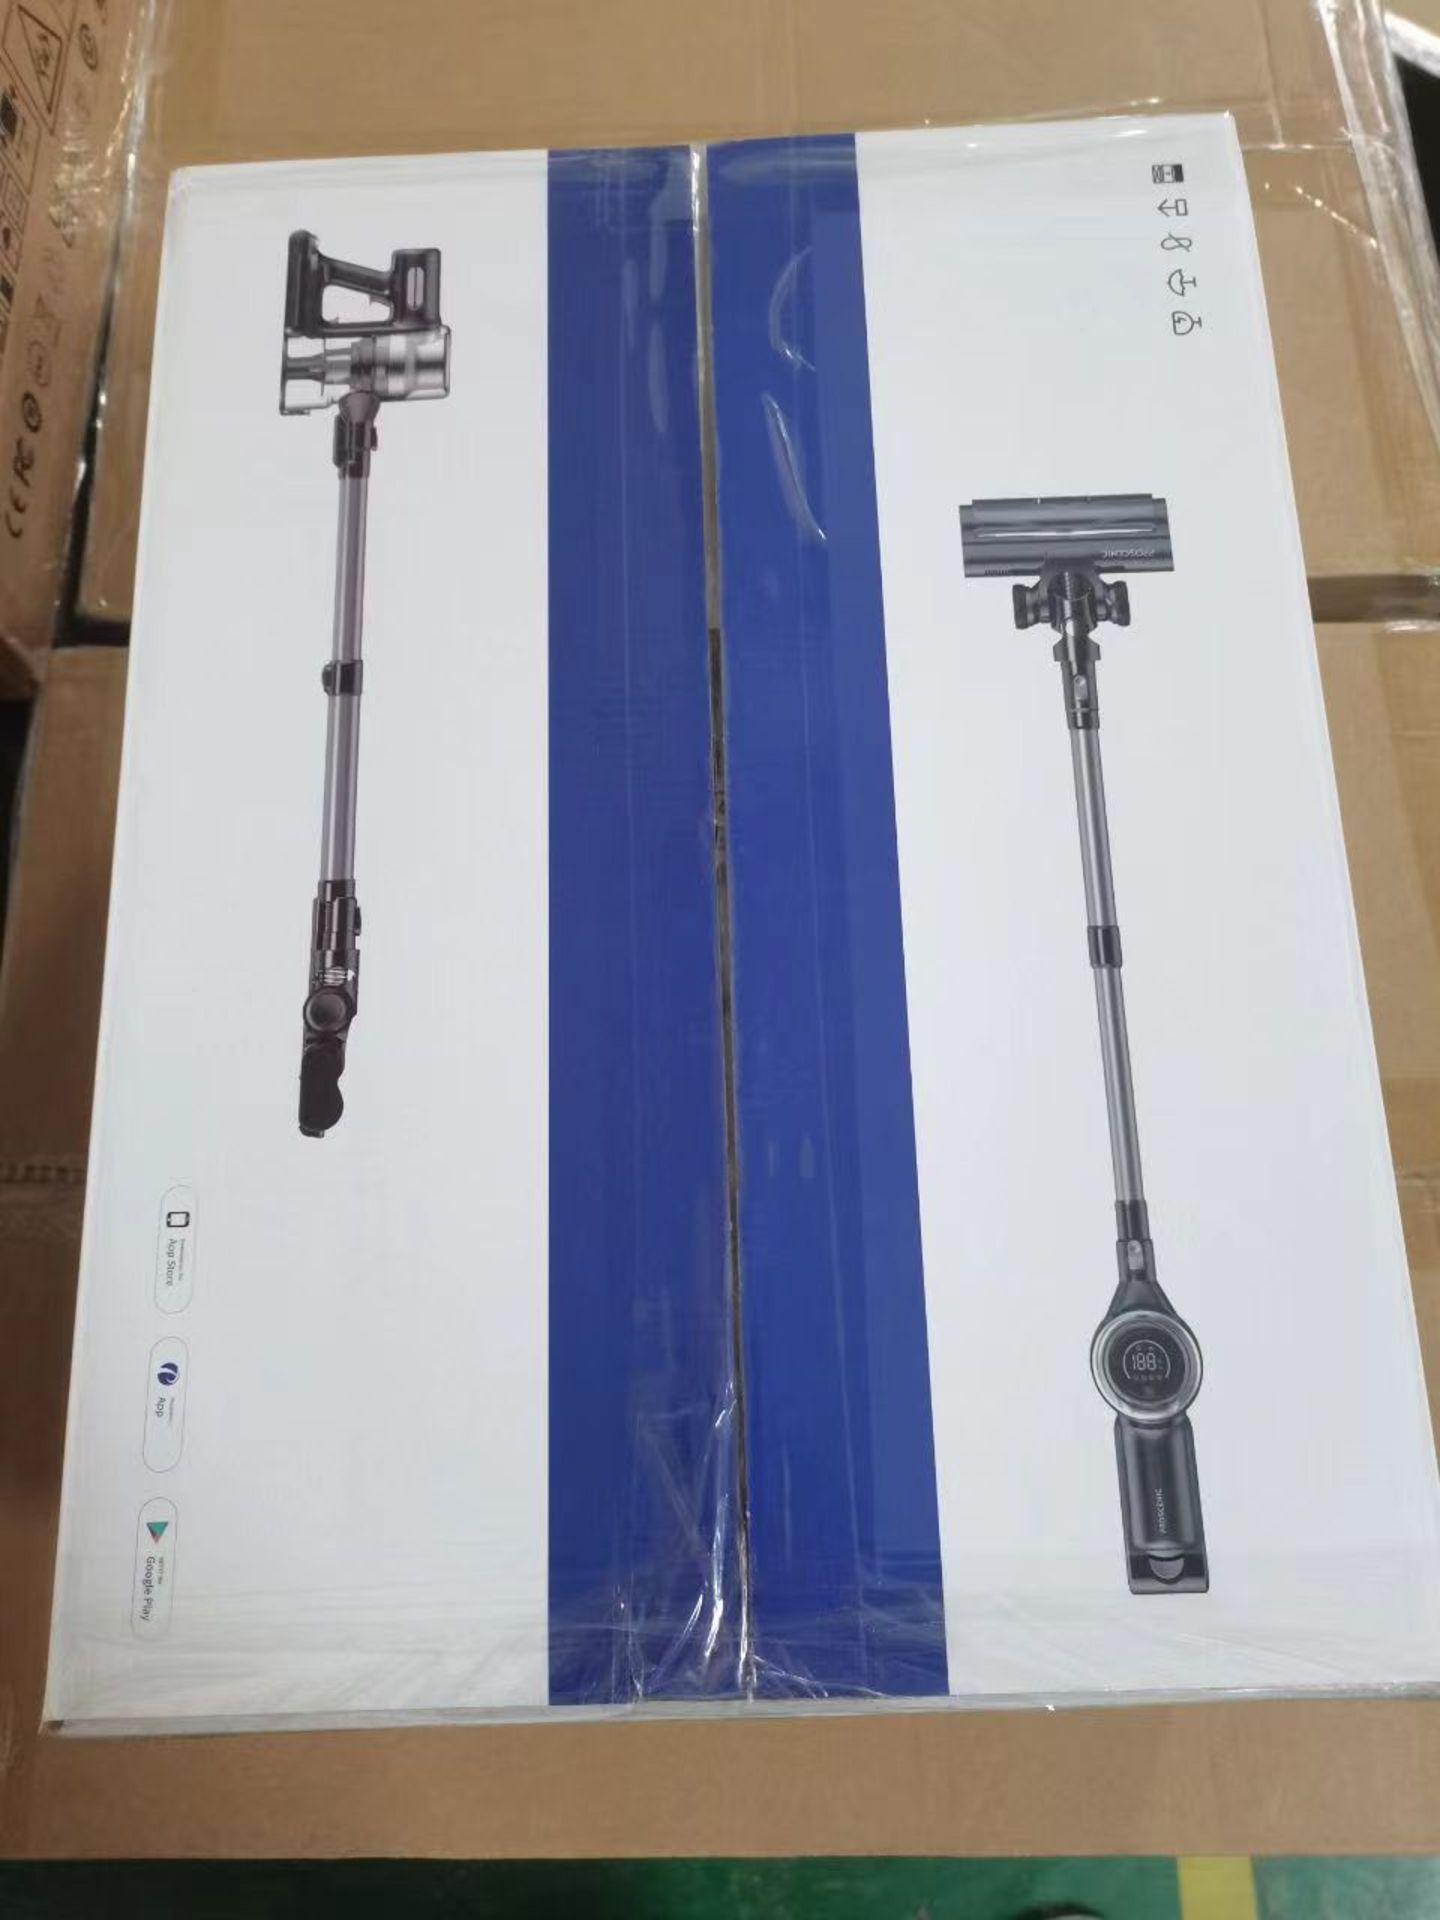 TRADE LOT 4 x New & Boxed Proscenic P12 Cordless Vacuum Cleaner, 33Kpa Stick Vacuum Cleaner with - Image 5 of 11